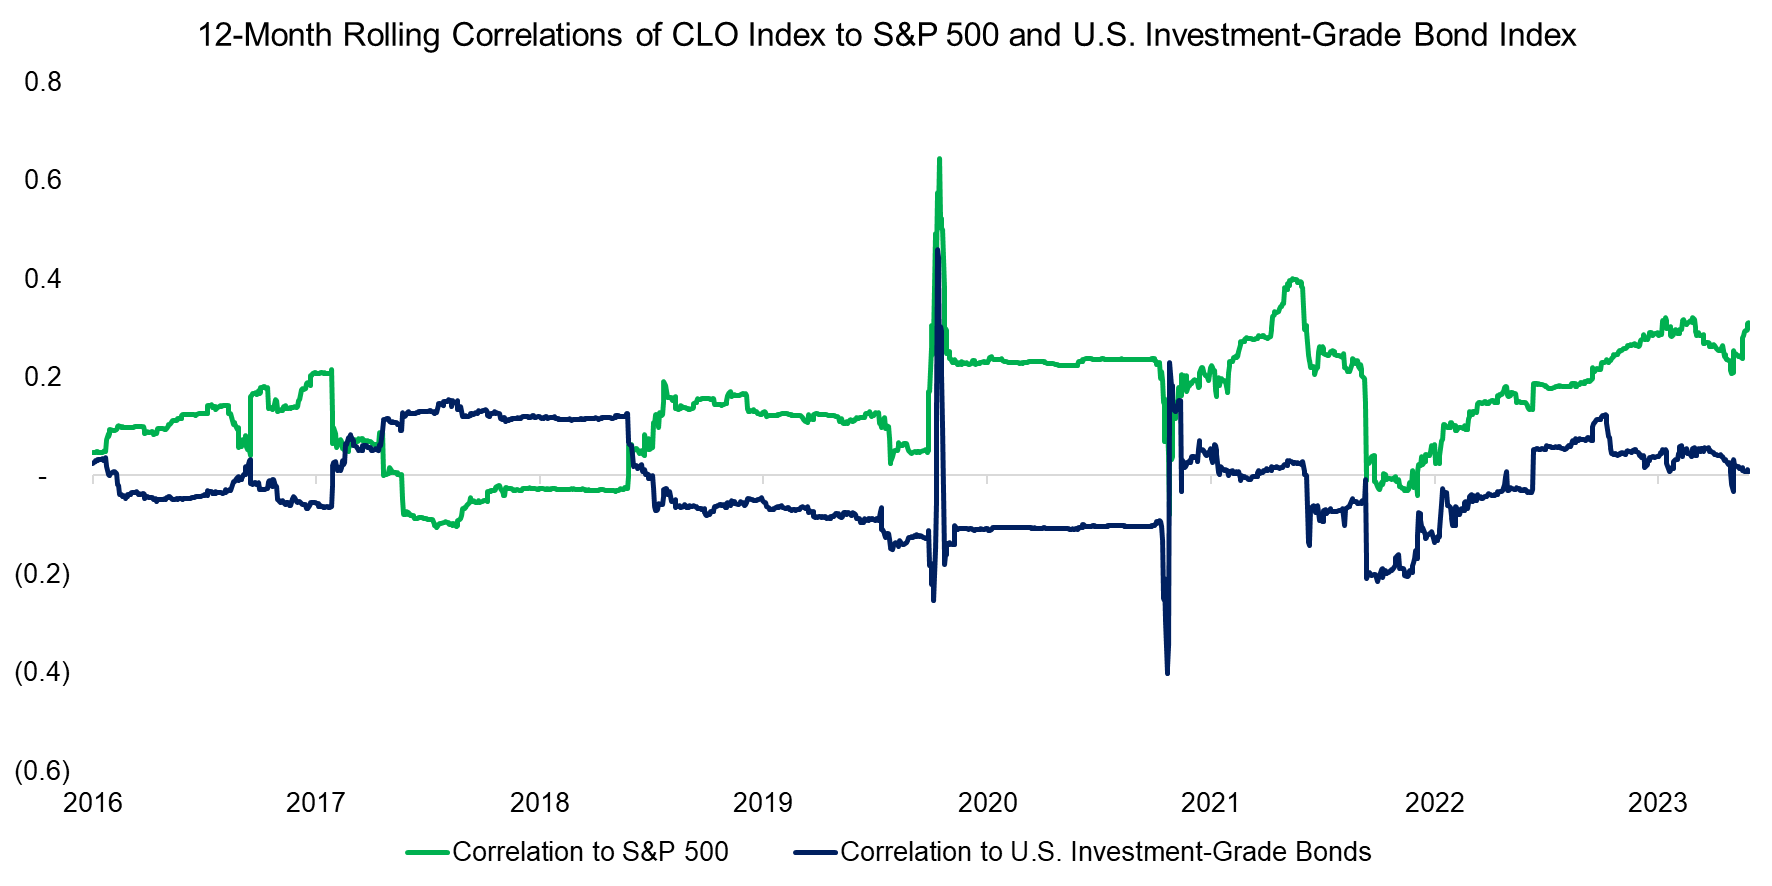 12-Month Rolling Correlations of CLO Index to S&P 500 and U.S. Investment-Grade Bond Index